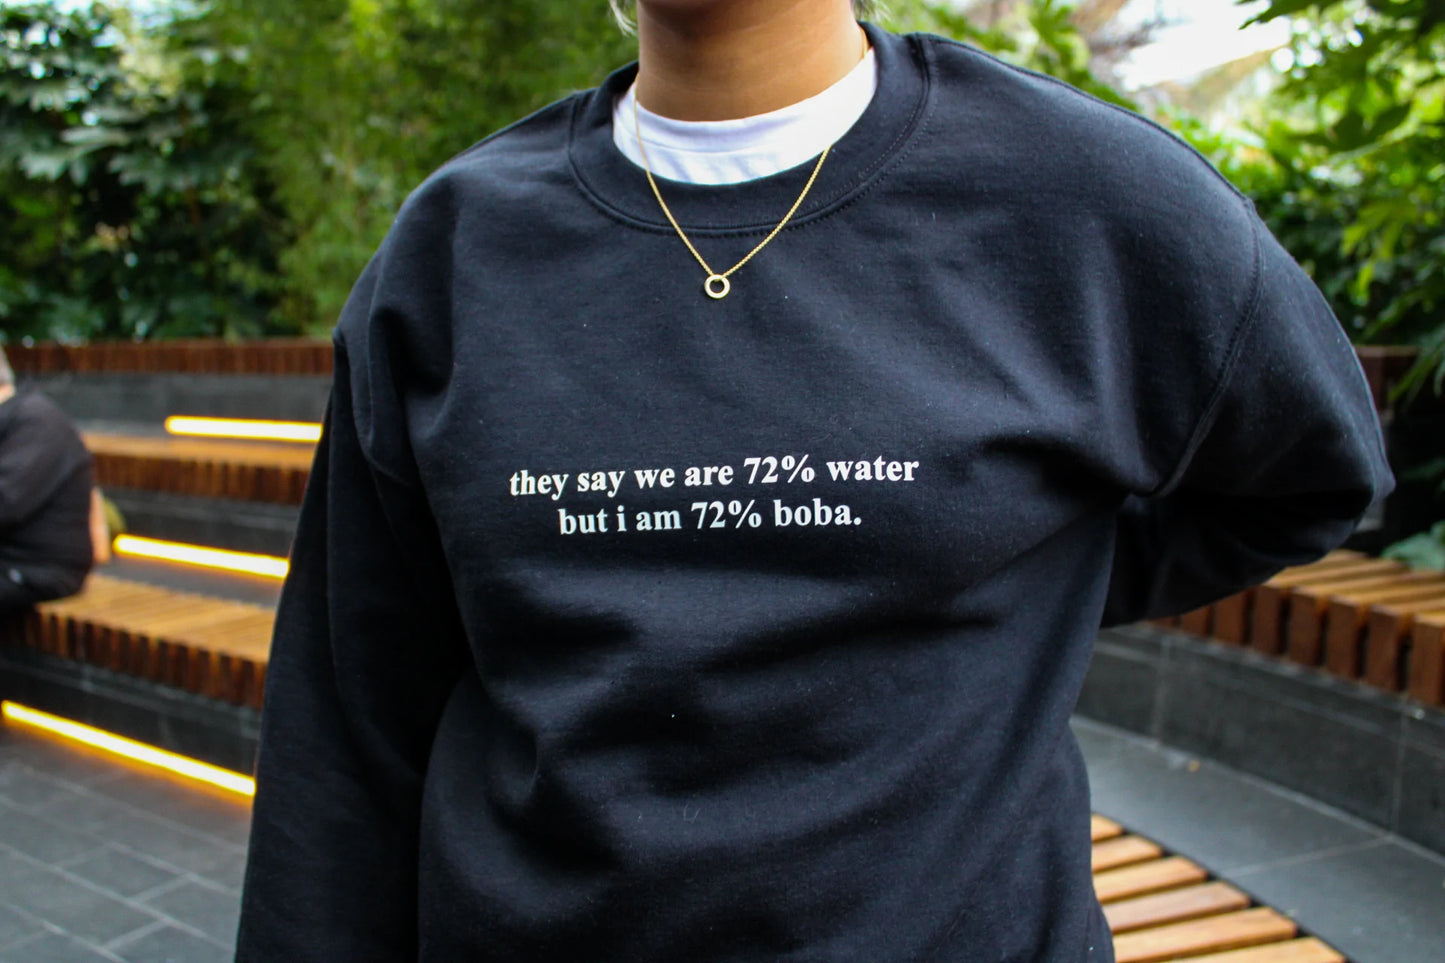 they say we are 72% water but i am 72% boba | t-shirt pre-order